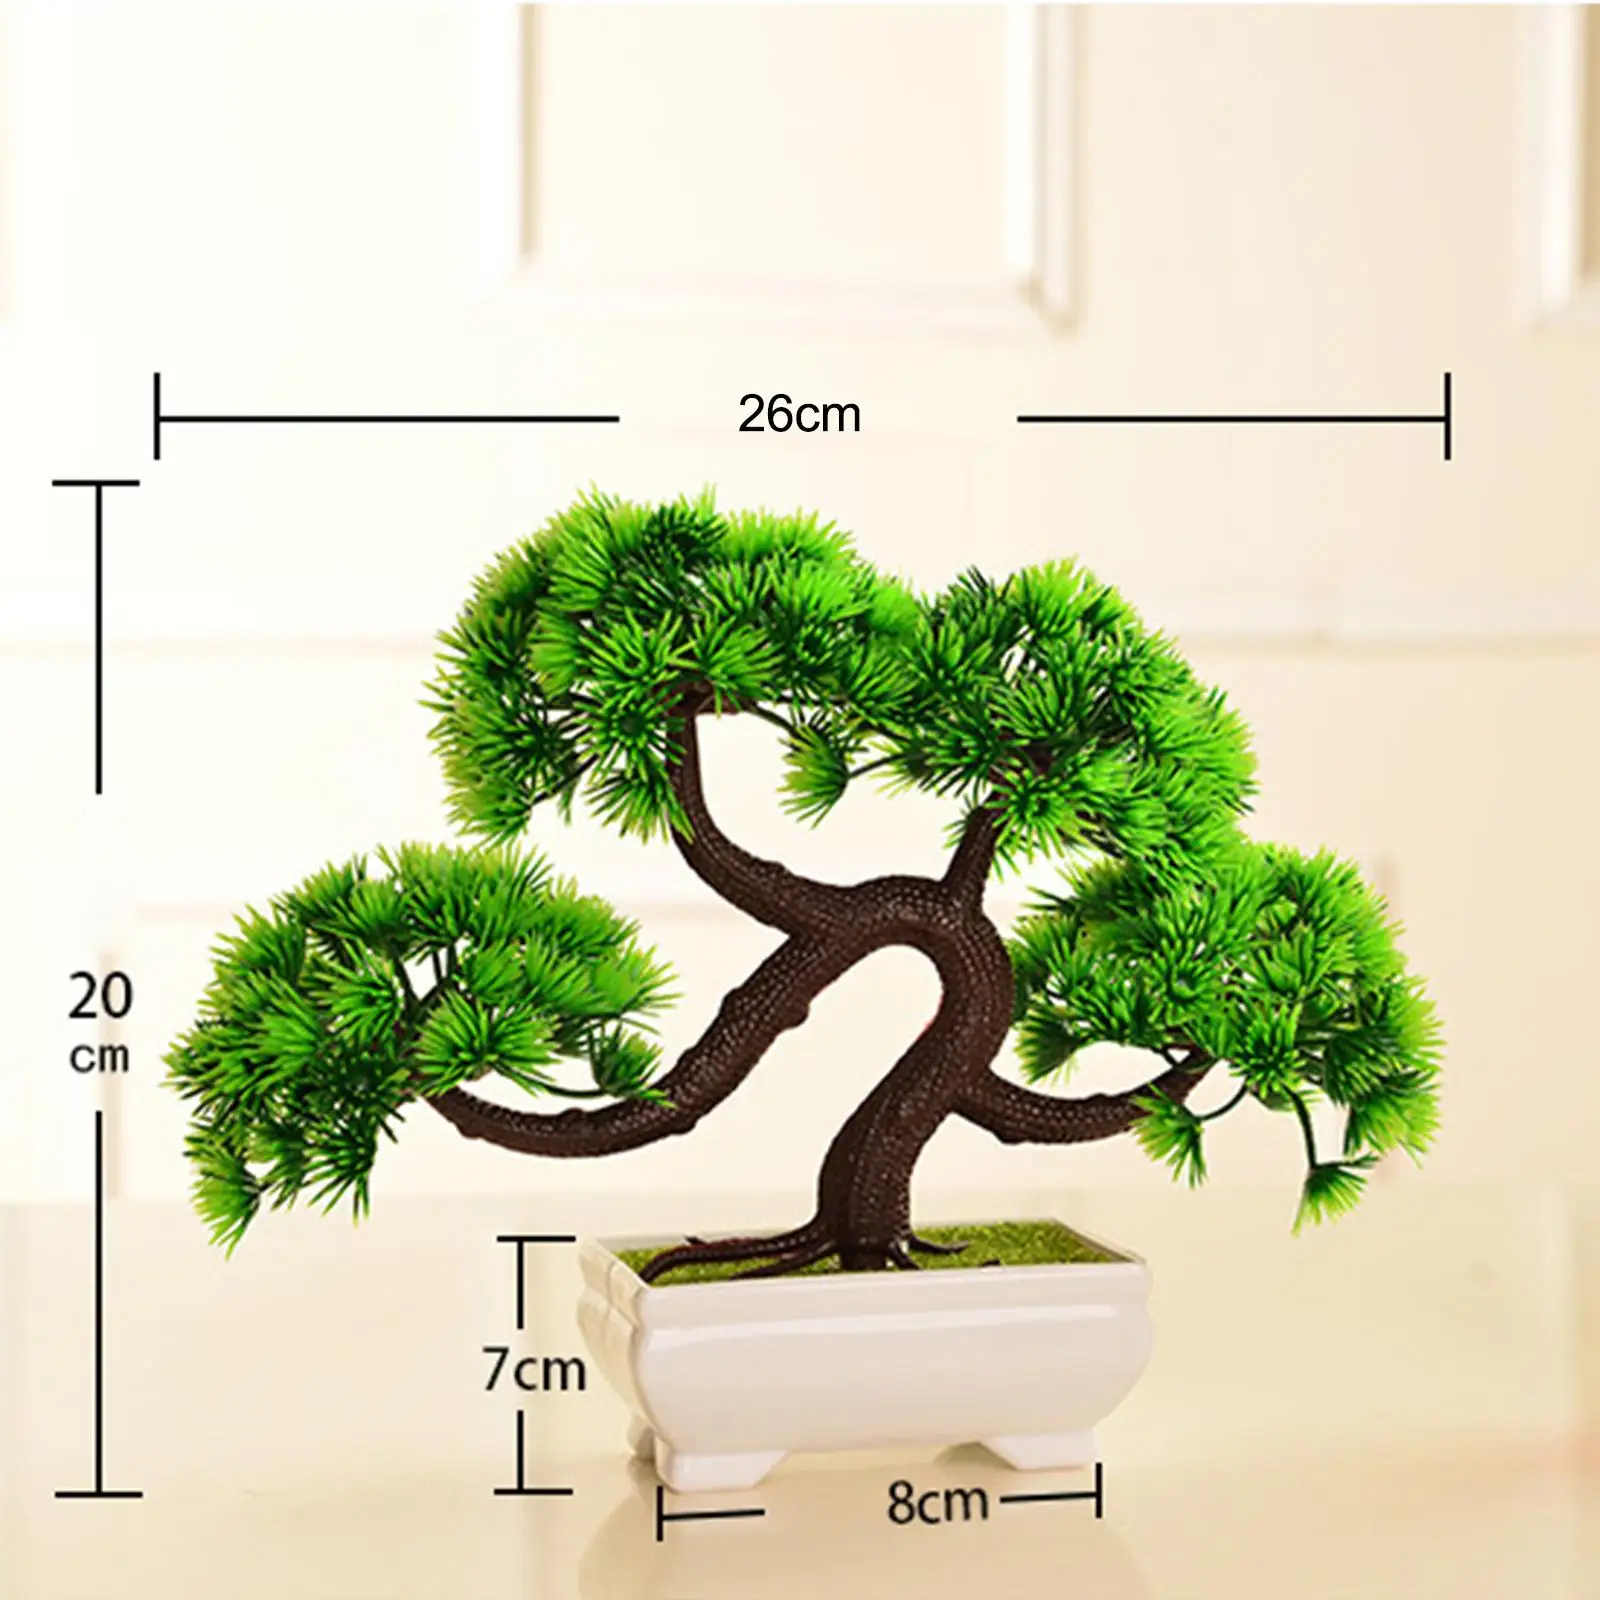 Artificial Bonsai Tree Artificial Potted Green Plants Desk Display Fake Tree for Living Room Table Office Home Windowsill